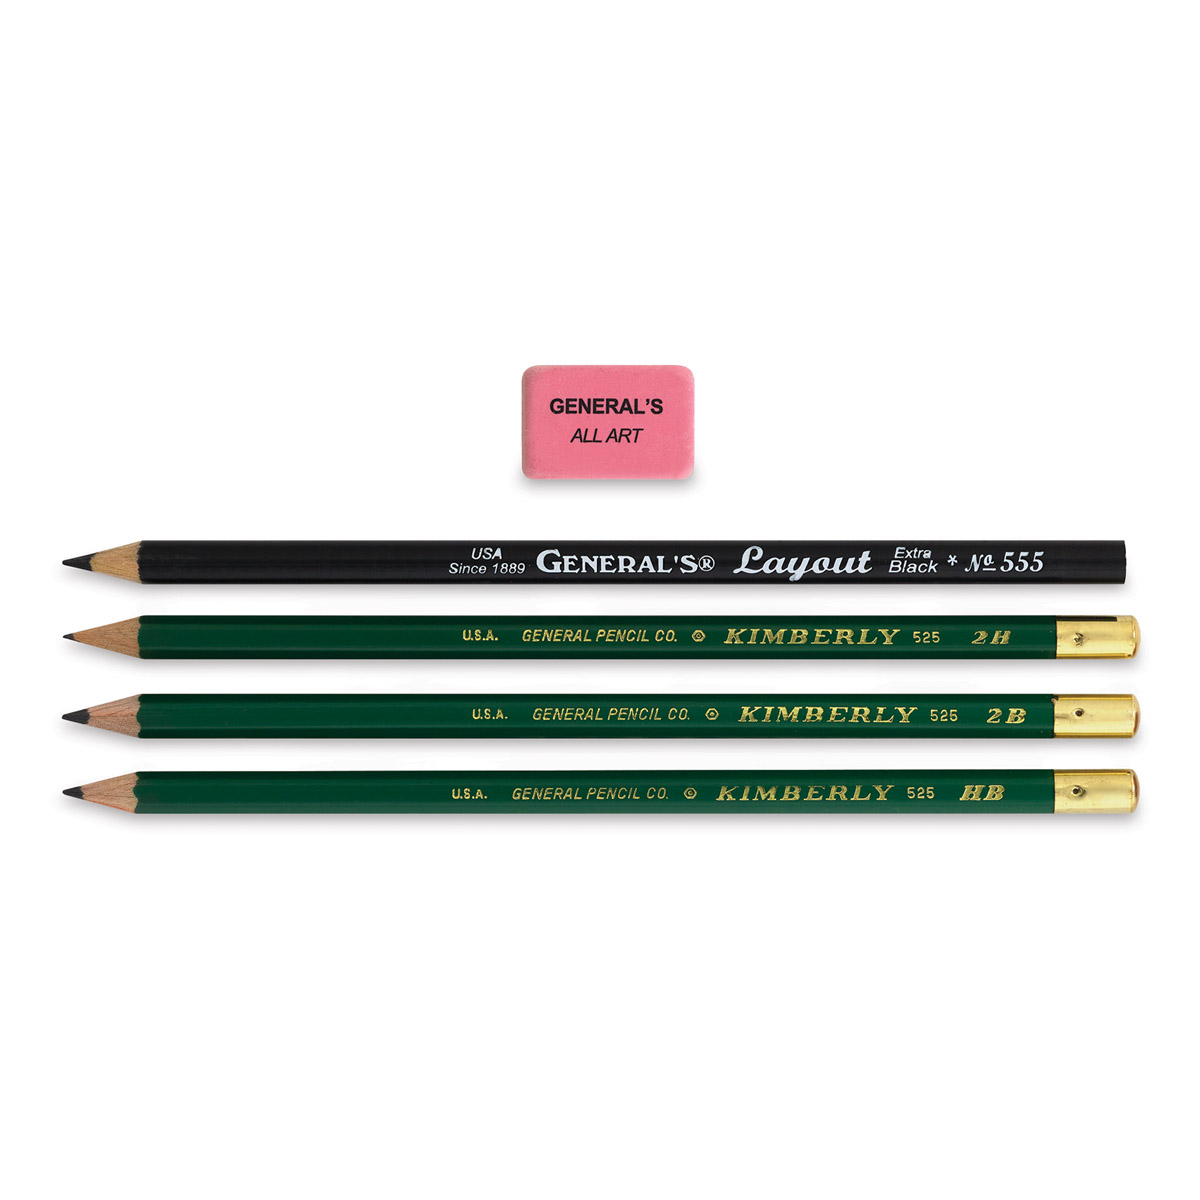 General Pencil Co. Kimberly Pencils